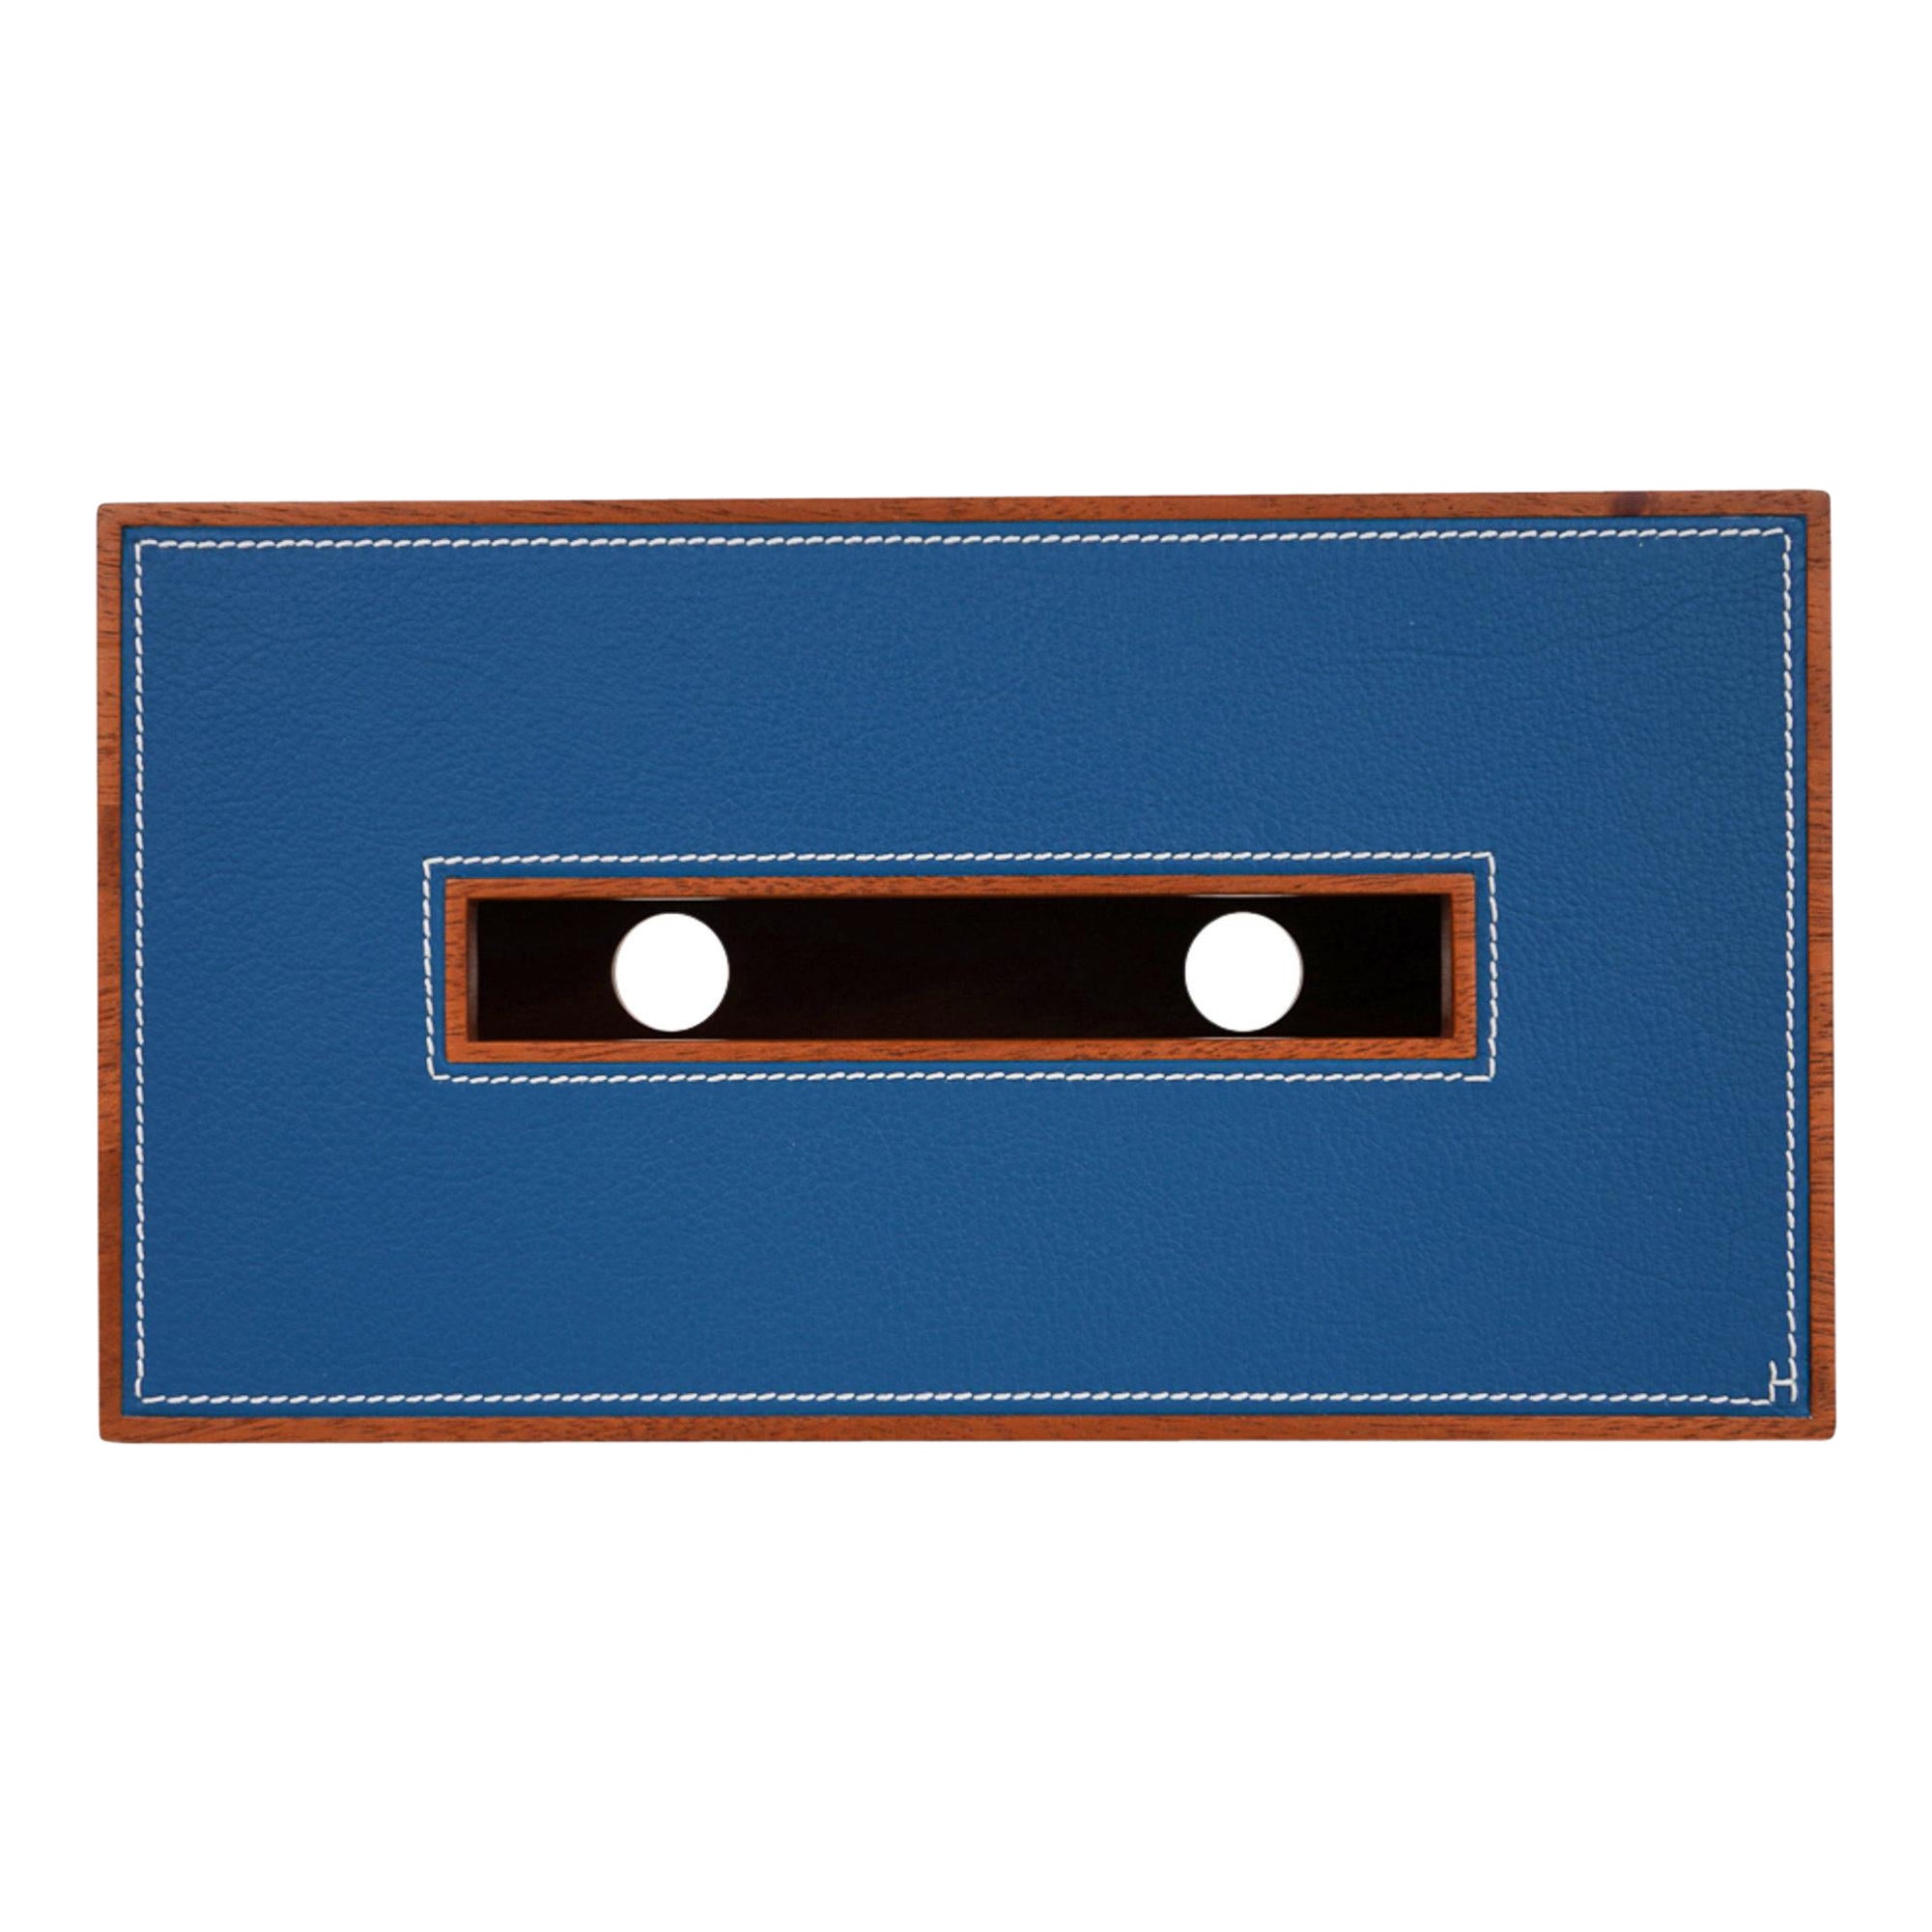 Mightychic offers an Hermes Pleiade large model Tissue Box featured in Mahogany
and Blue Izmir Taurillon leather.
Modern and elegant with white topstitch on the leather.
Comes with signature Hermes box.
New or Pristine Store Fresh Condition.
final